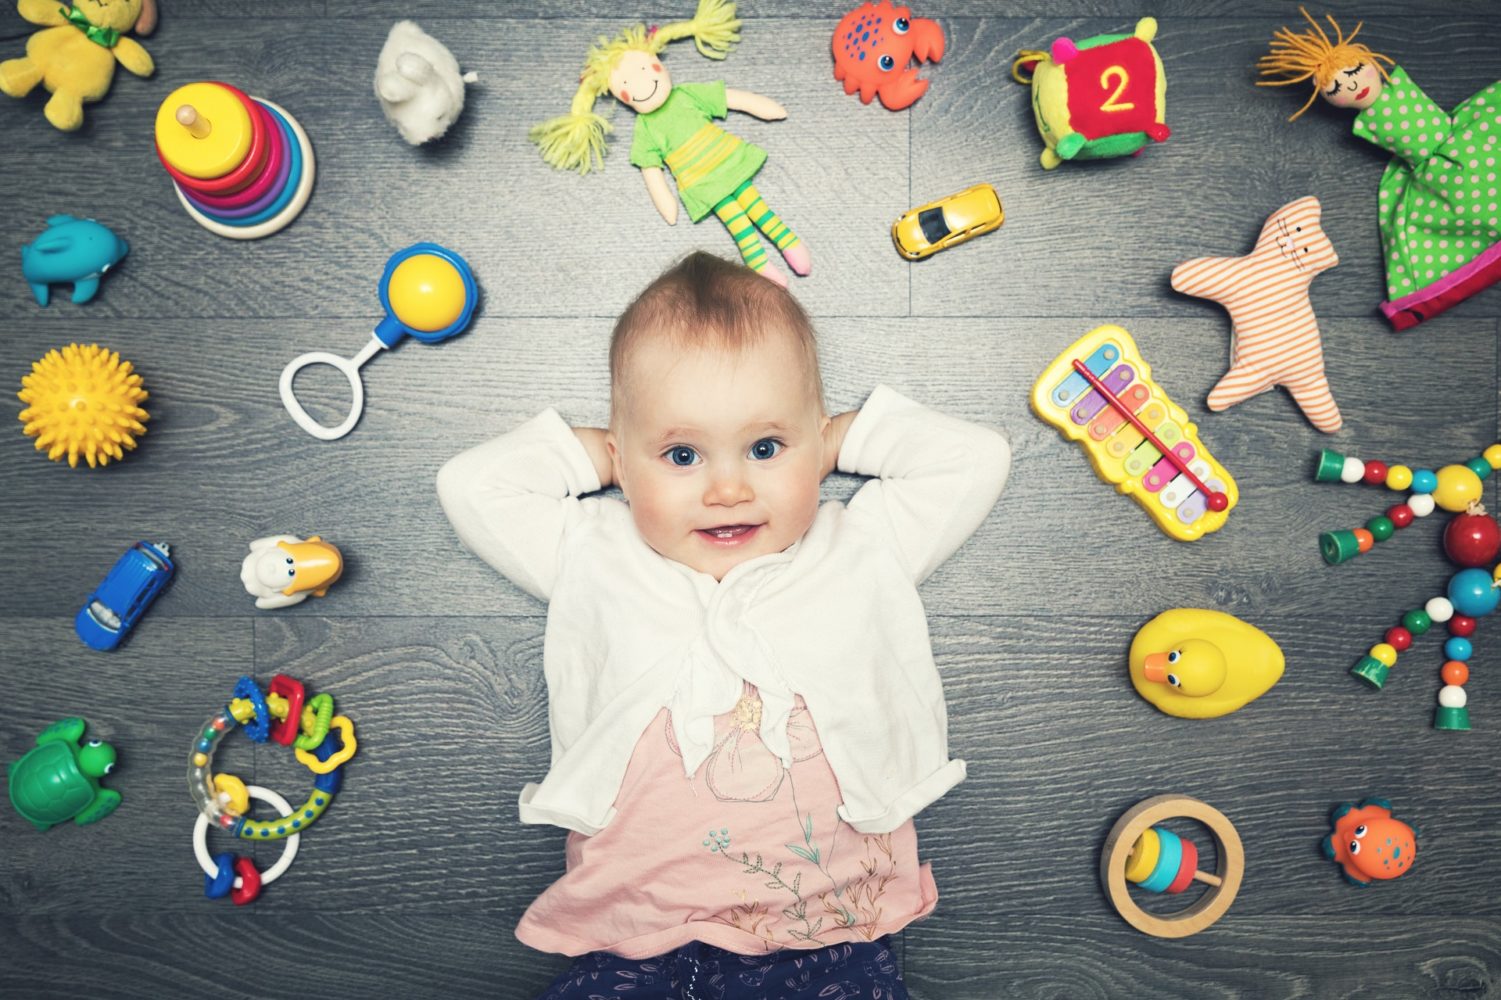 Baby Product Liability Insurance In Canada